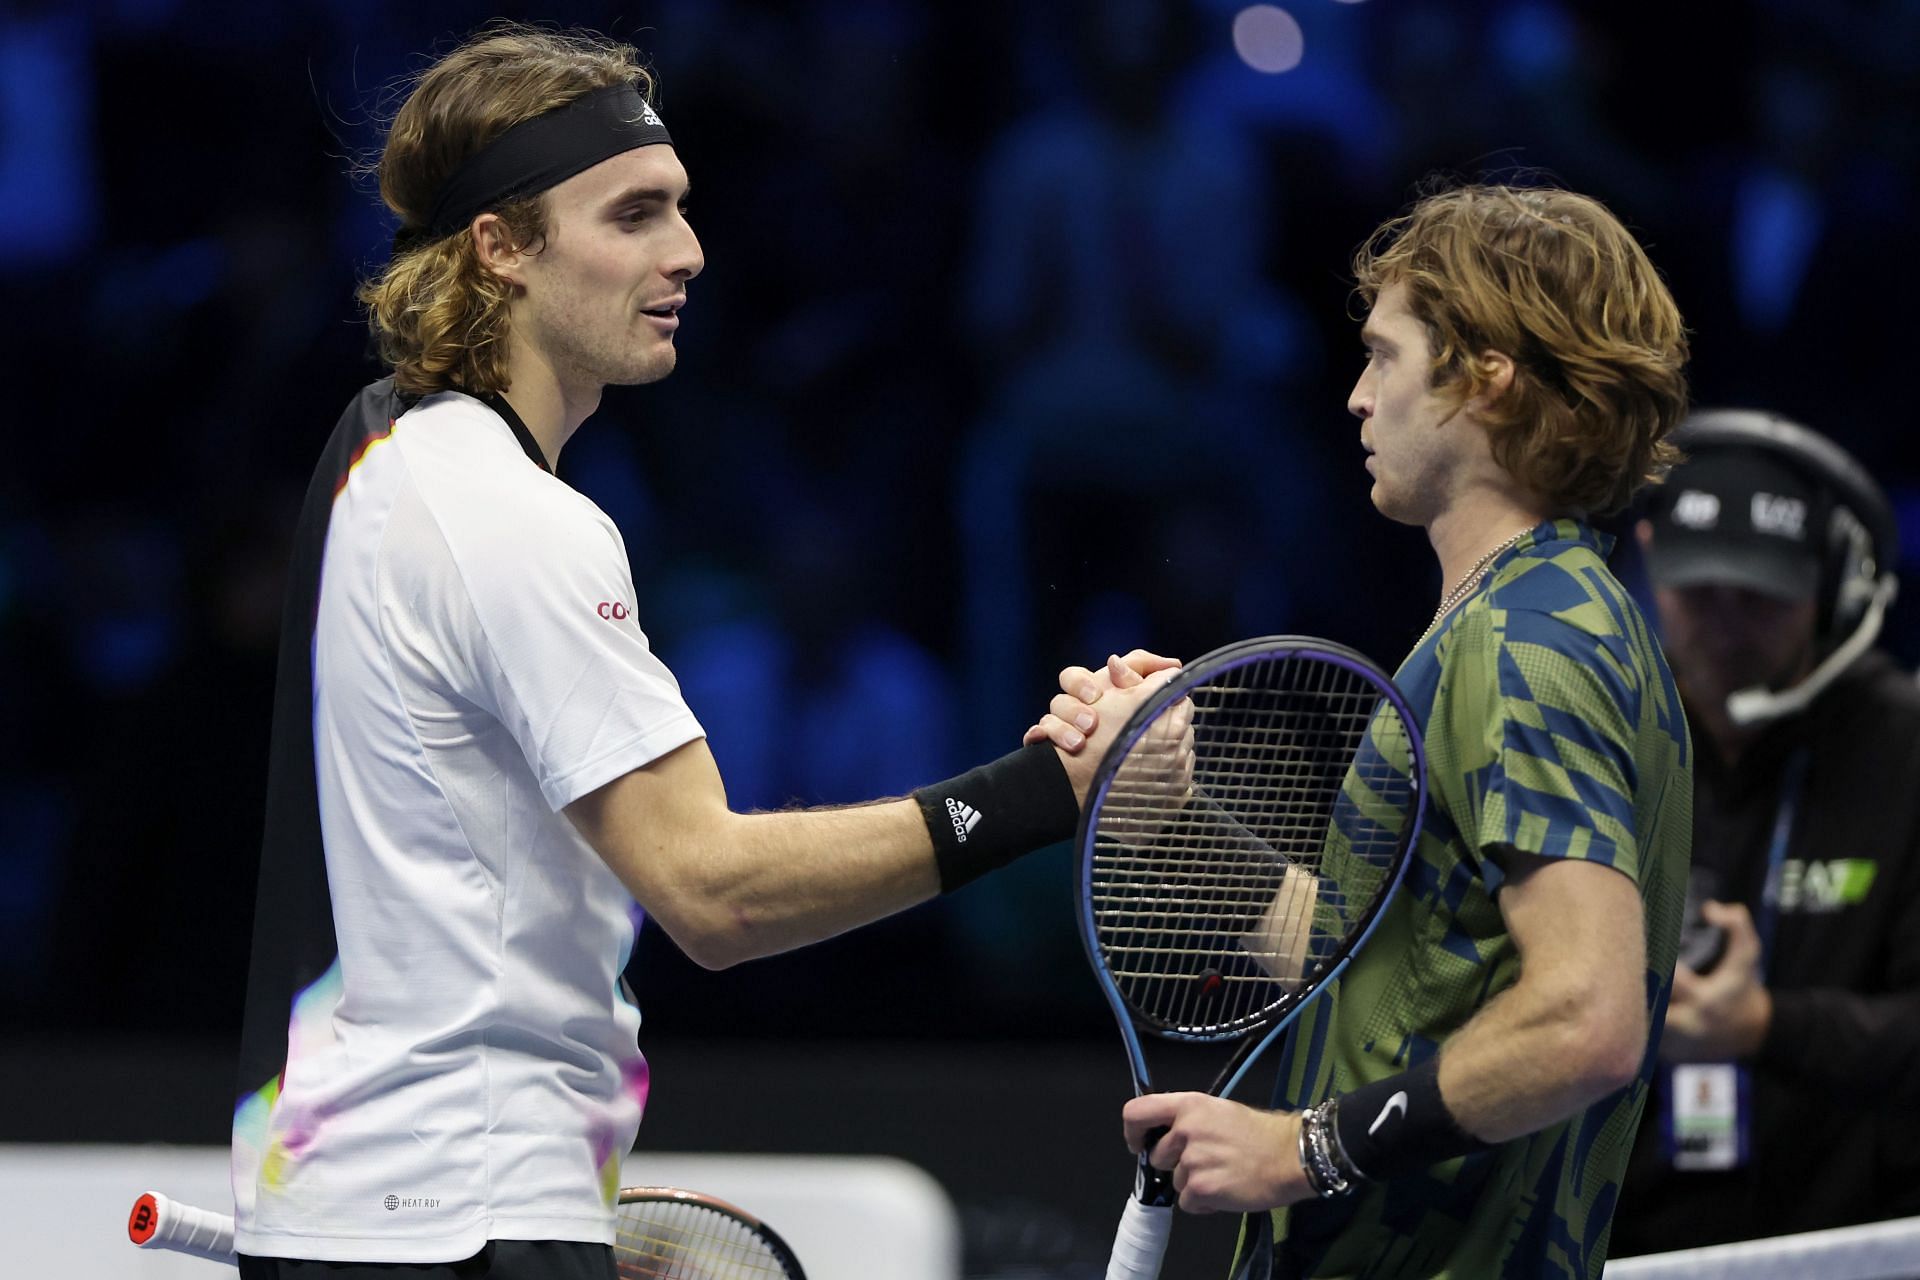 Stefanos Tsitsipas (L) and Andrey Rublev